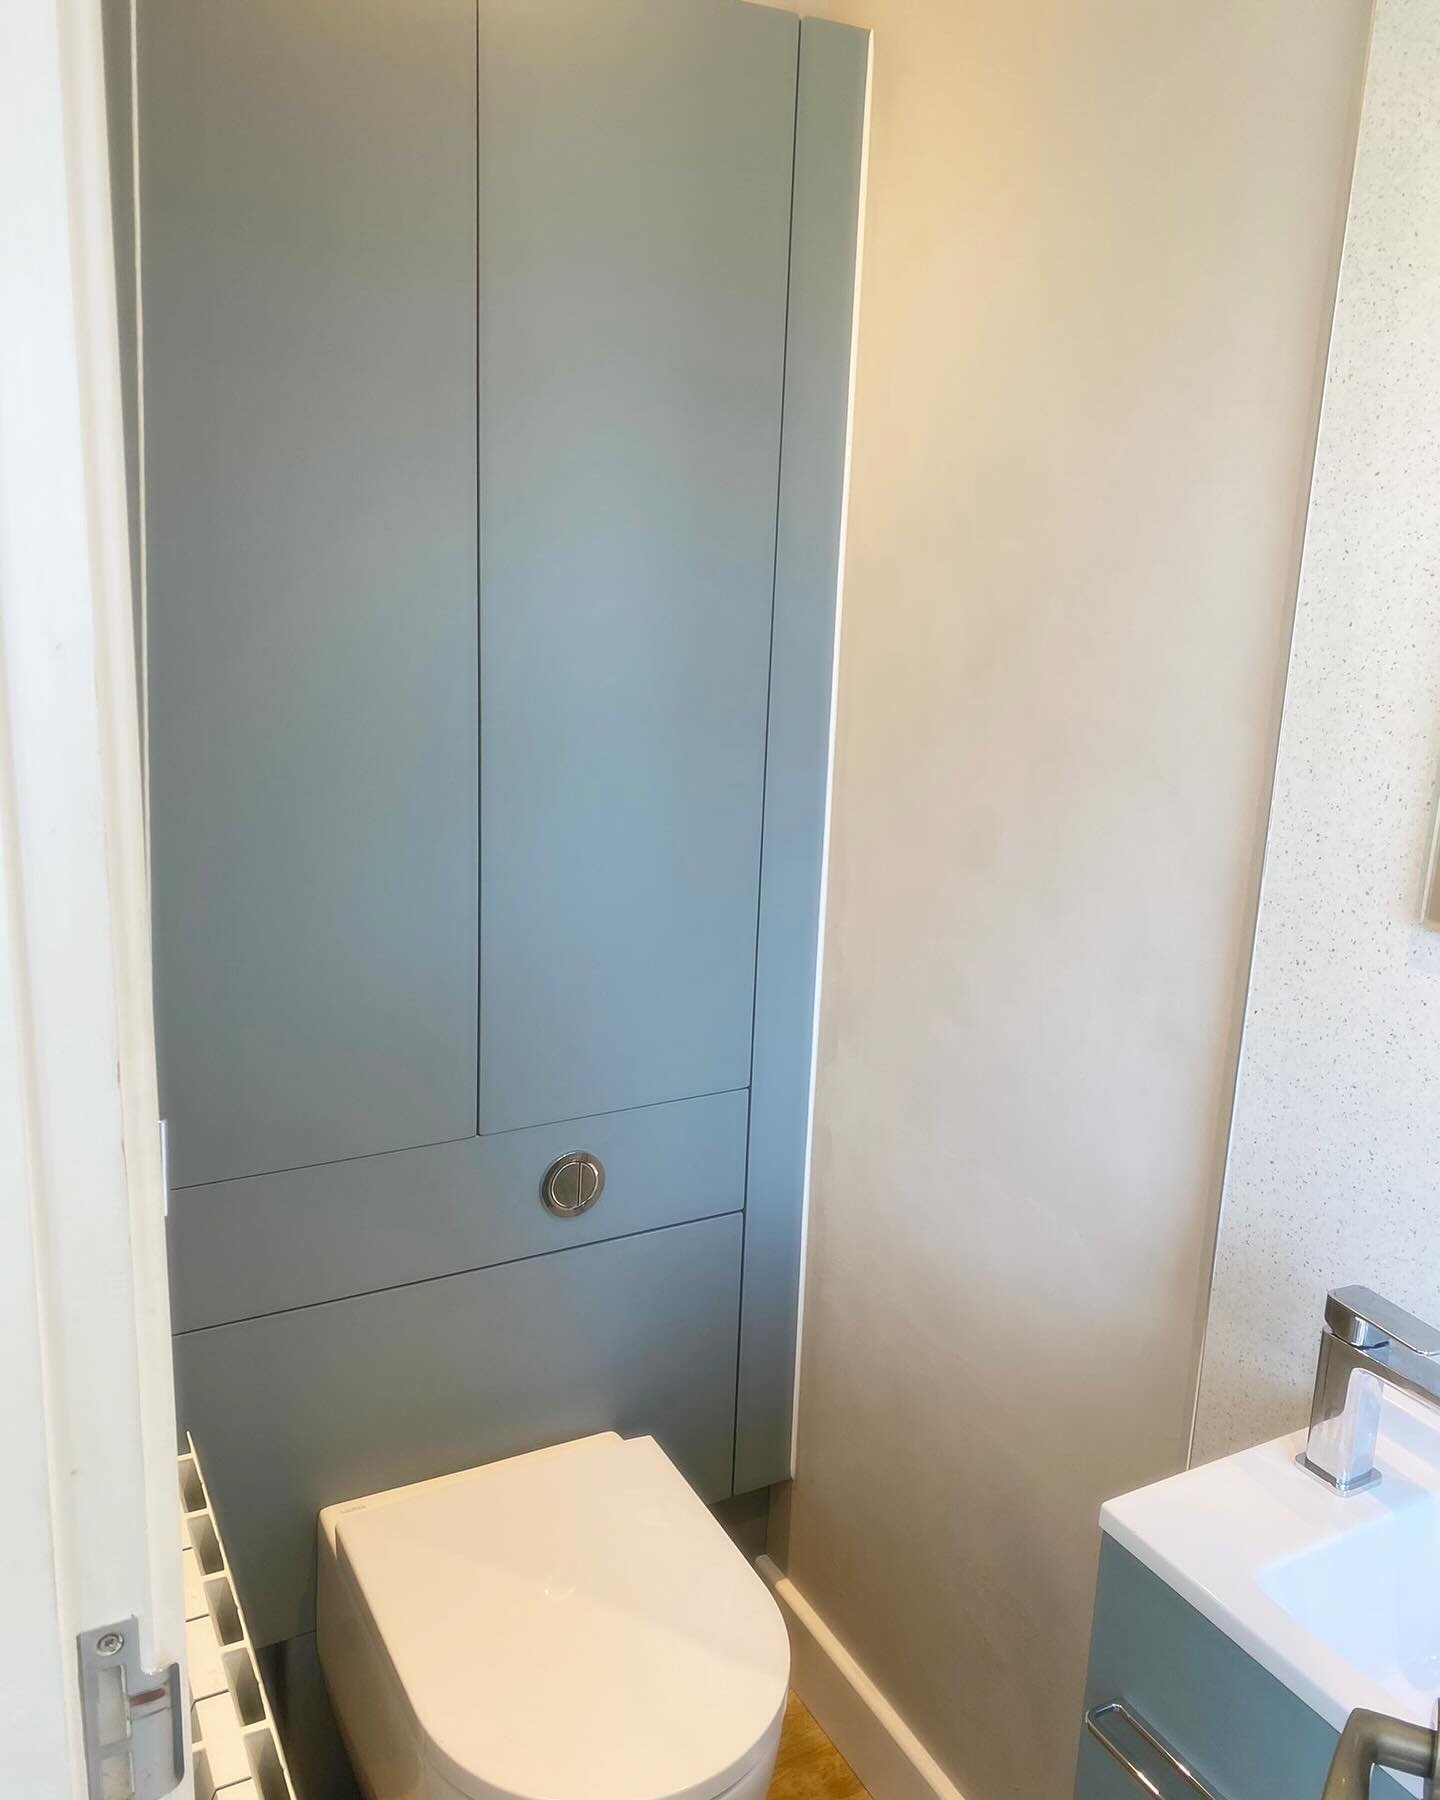 This recent Cloakroom installation carried out by our in-house installation team shows that even the smallest of spaces can provide practical storage. @ambiancebain #cloakroomdesign